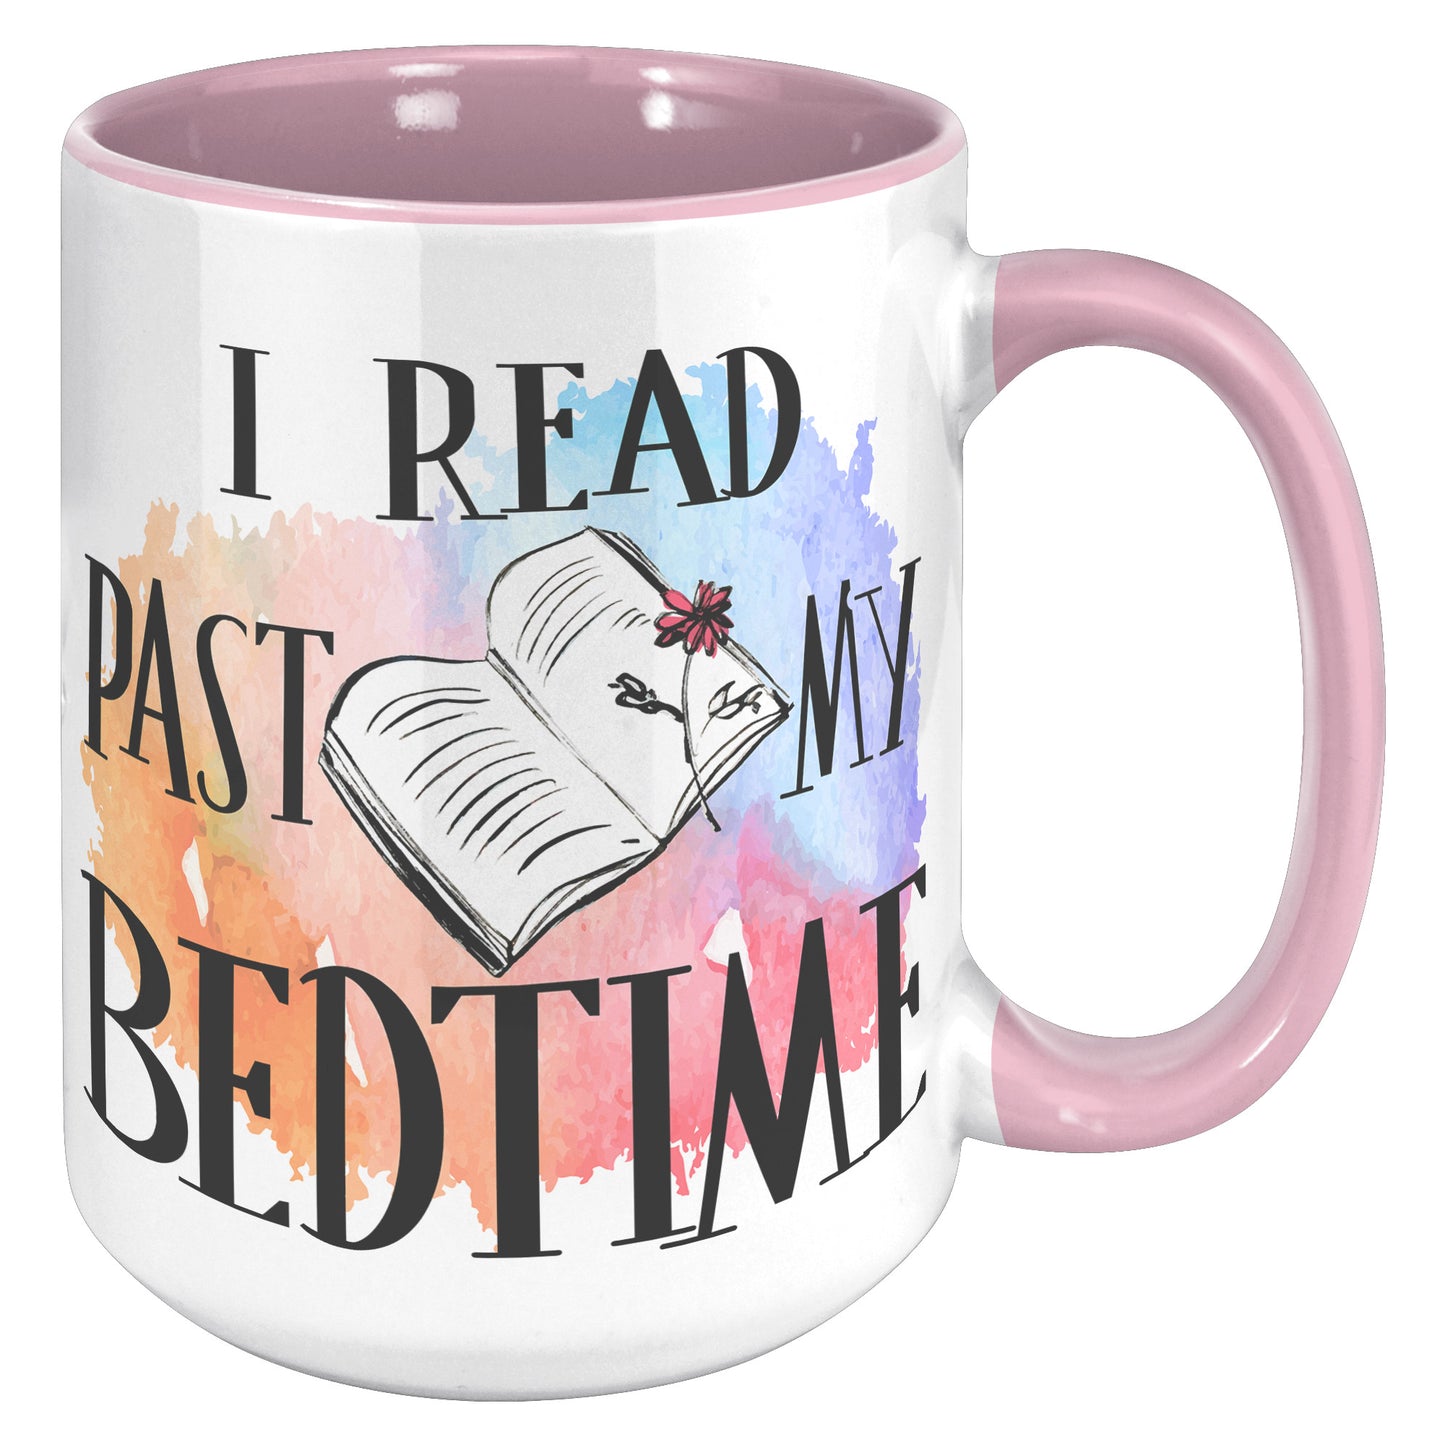 I Read Past My Bedtime | Accent Mug